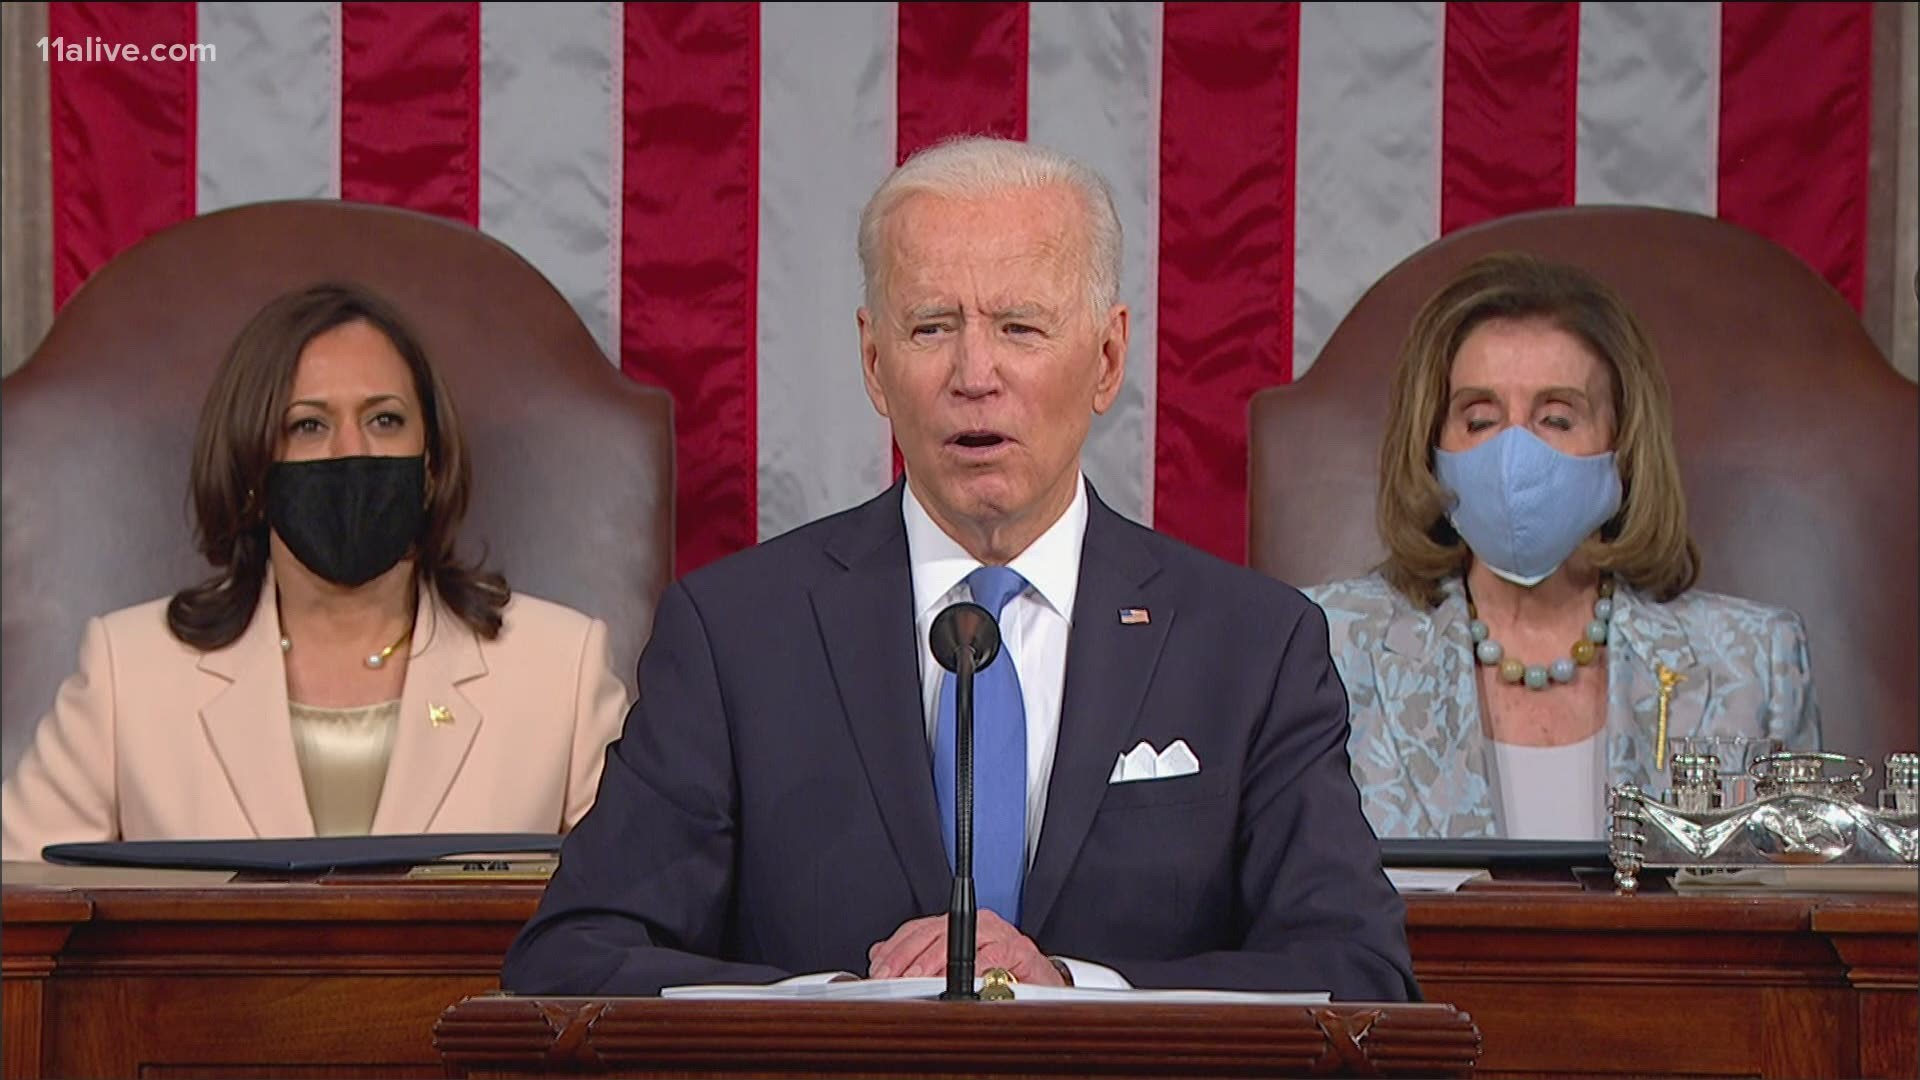 President Joe Biden declared Wednesday night in his first address to a joint session of Congress that “America is rising anew."